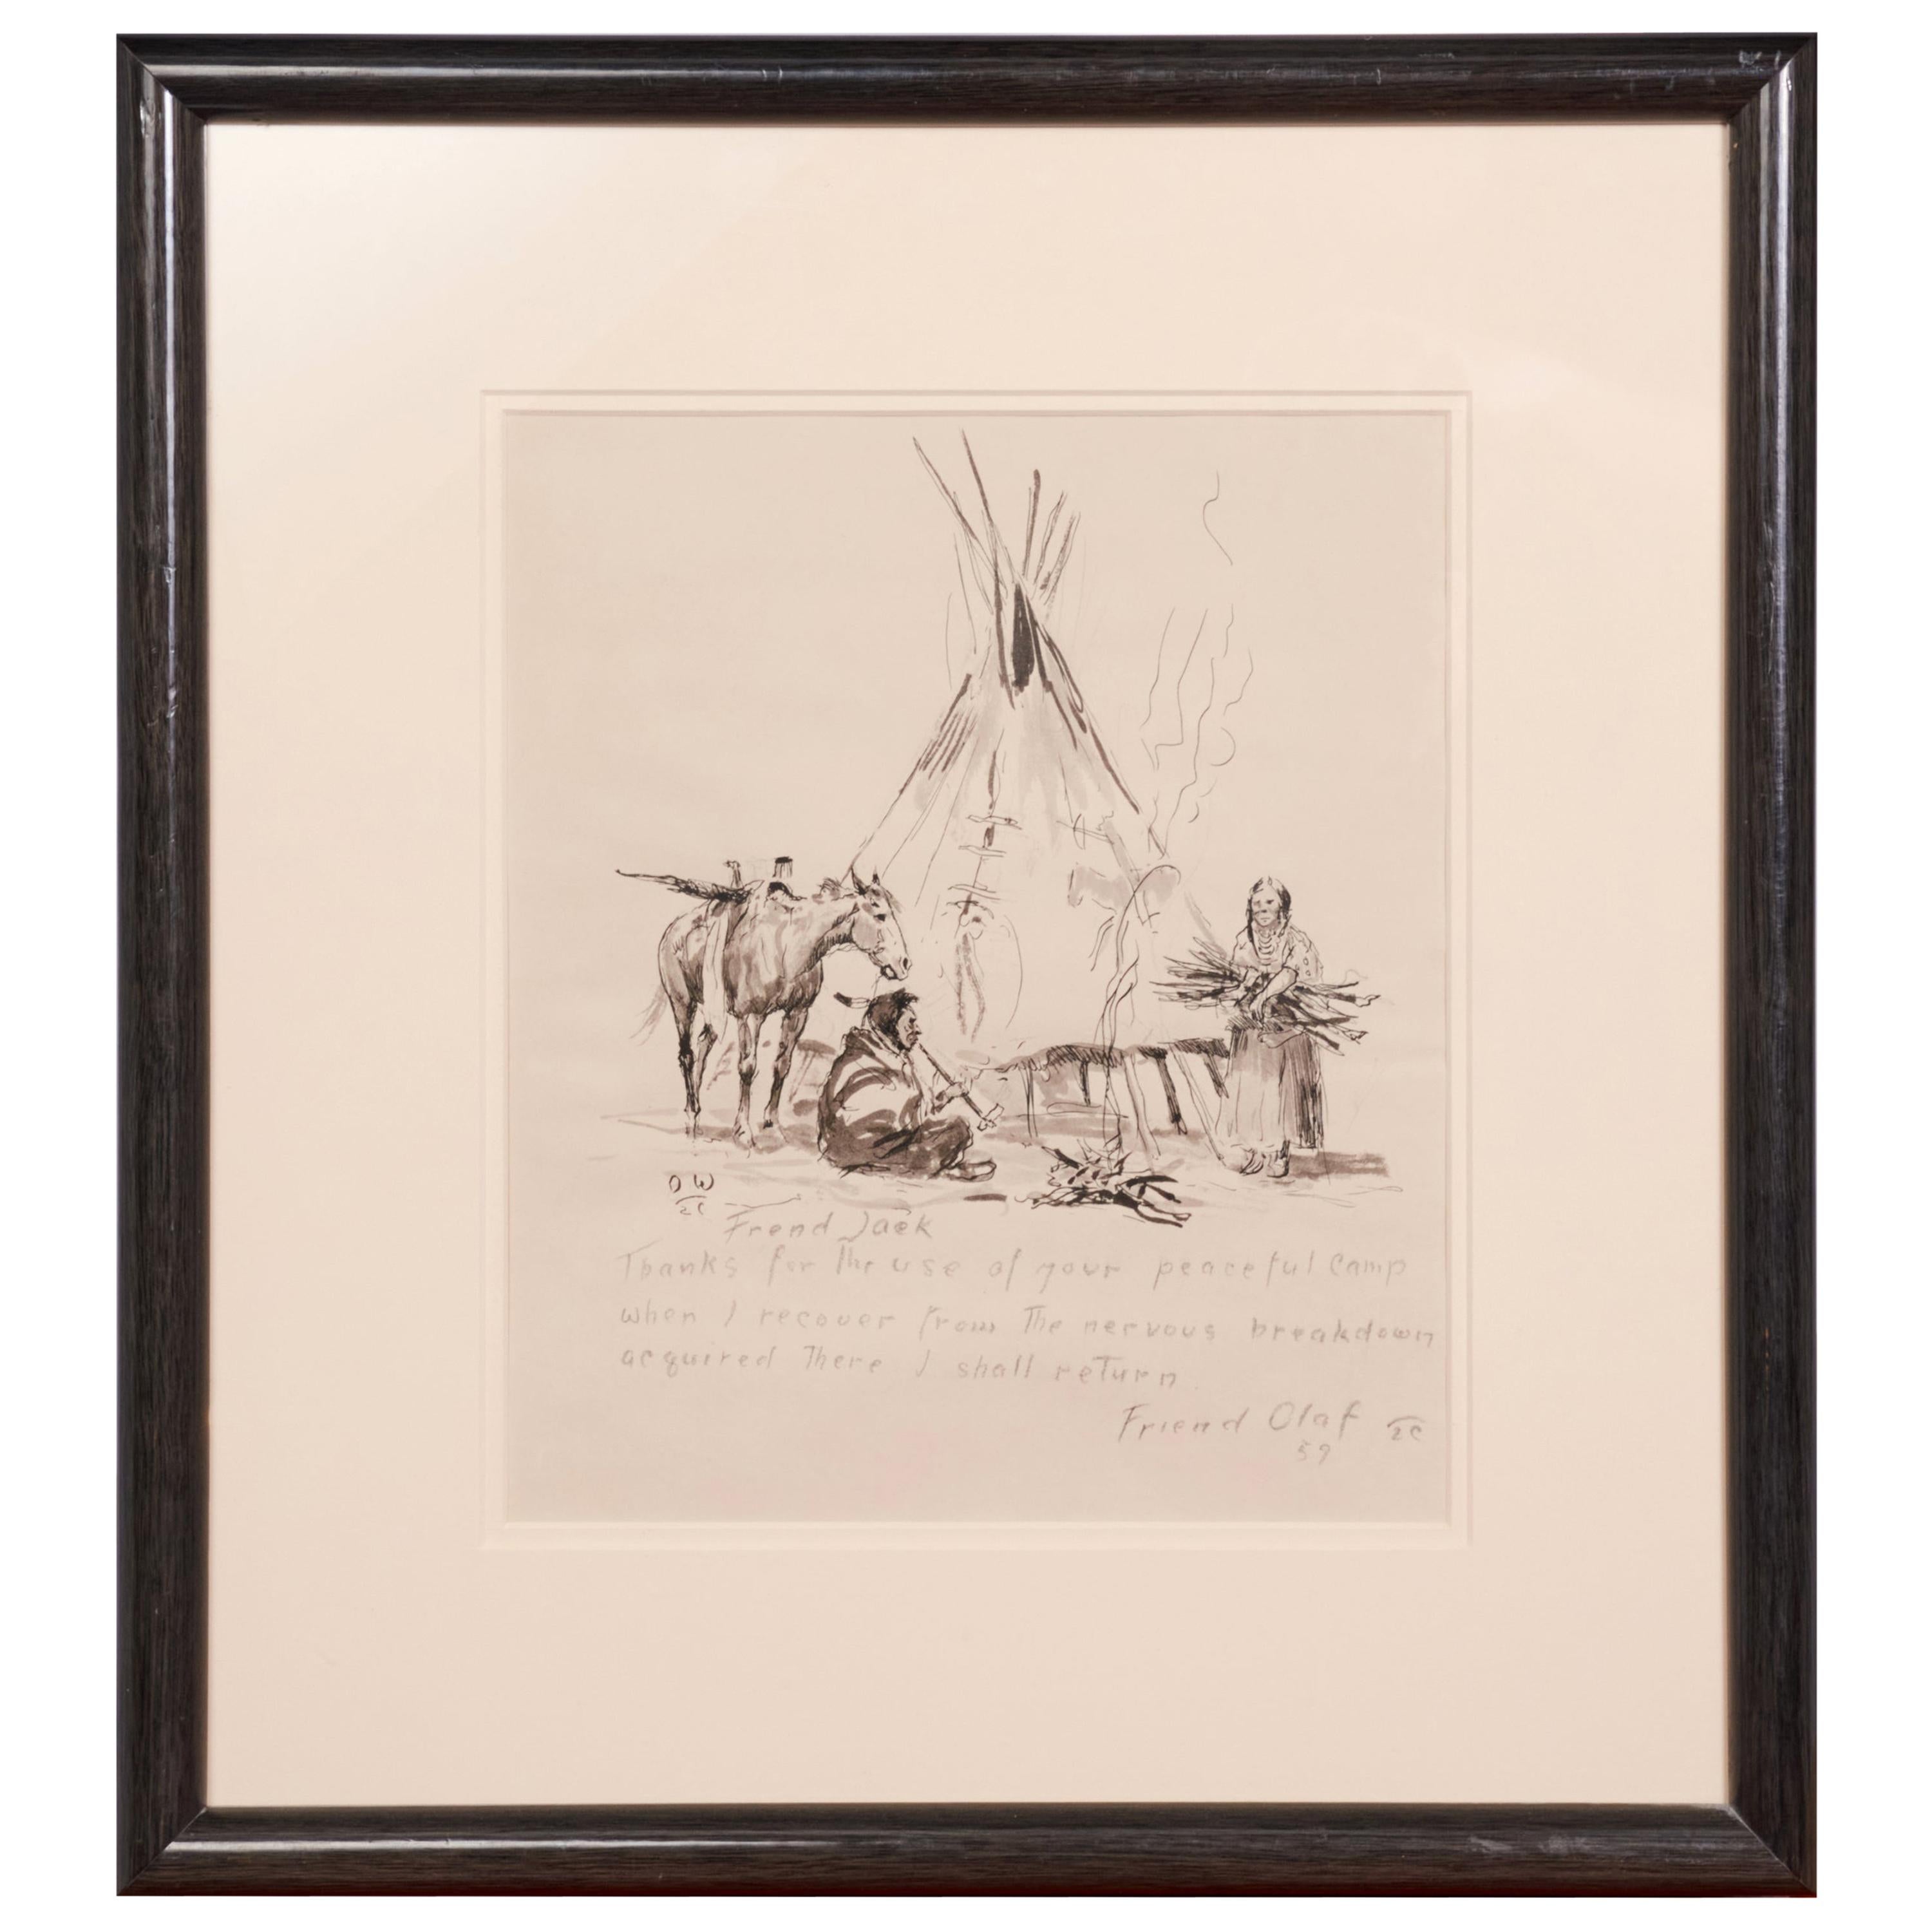 Peaceful Camp 1959, Ink and Graphite, Olaf Wieghorst, American